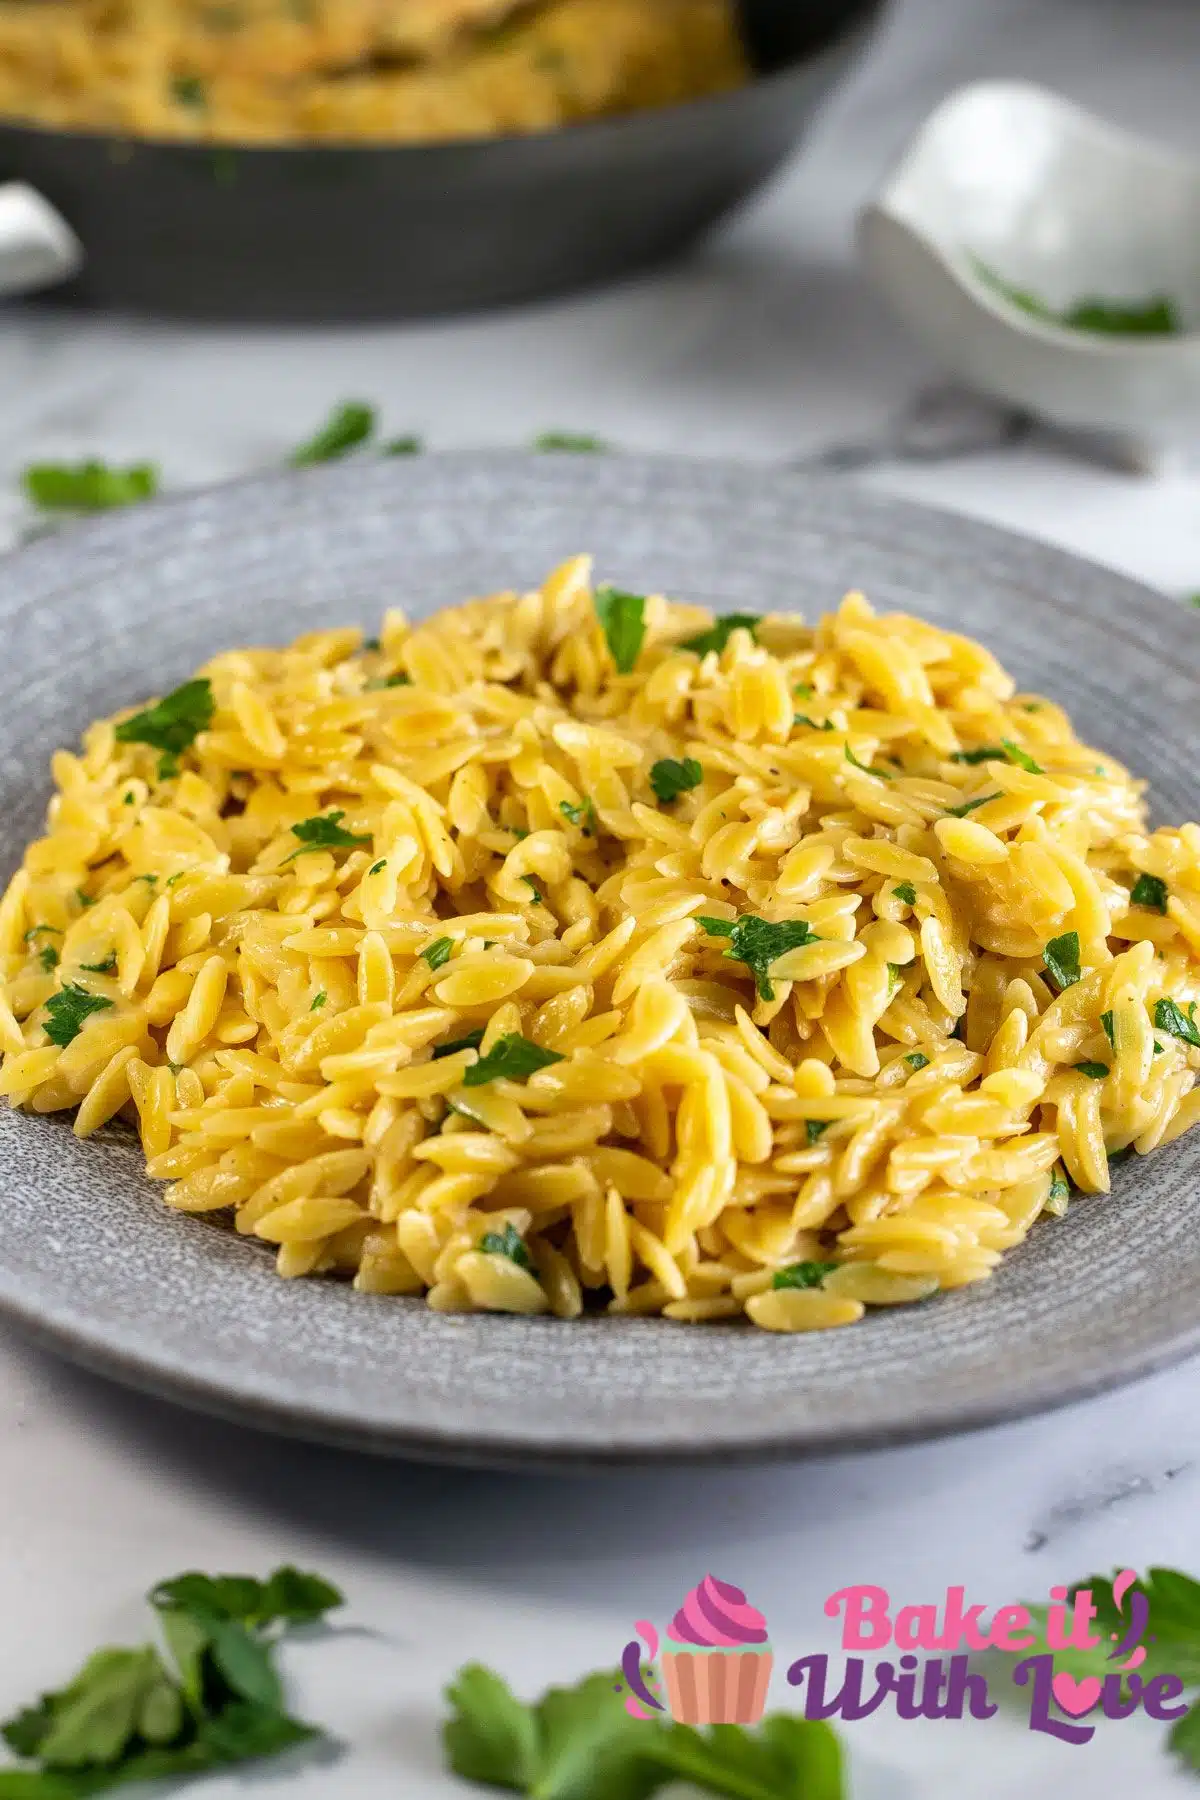 Tasty Parmesan orzo pasta side dish served in grey plate and garnished with fresh chopped parsley with the skillet in background.